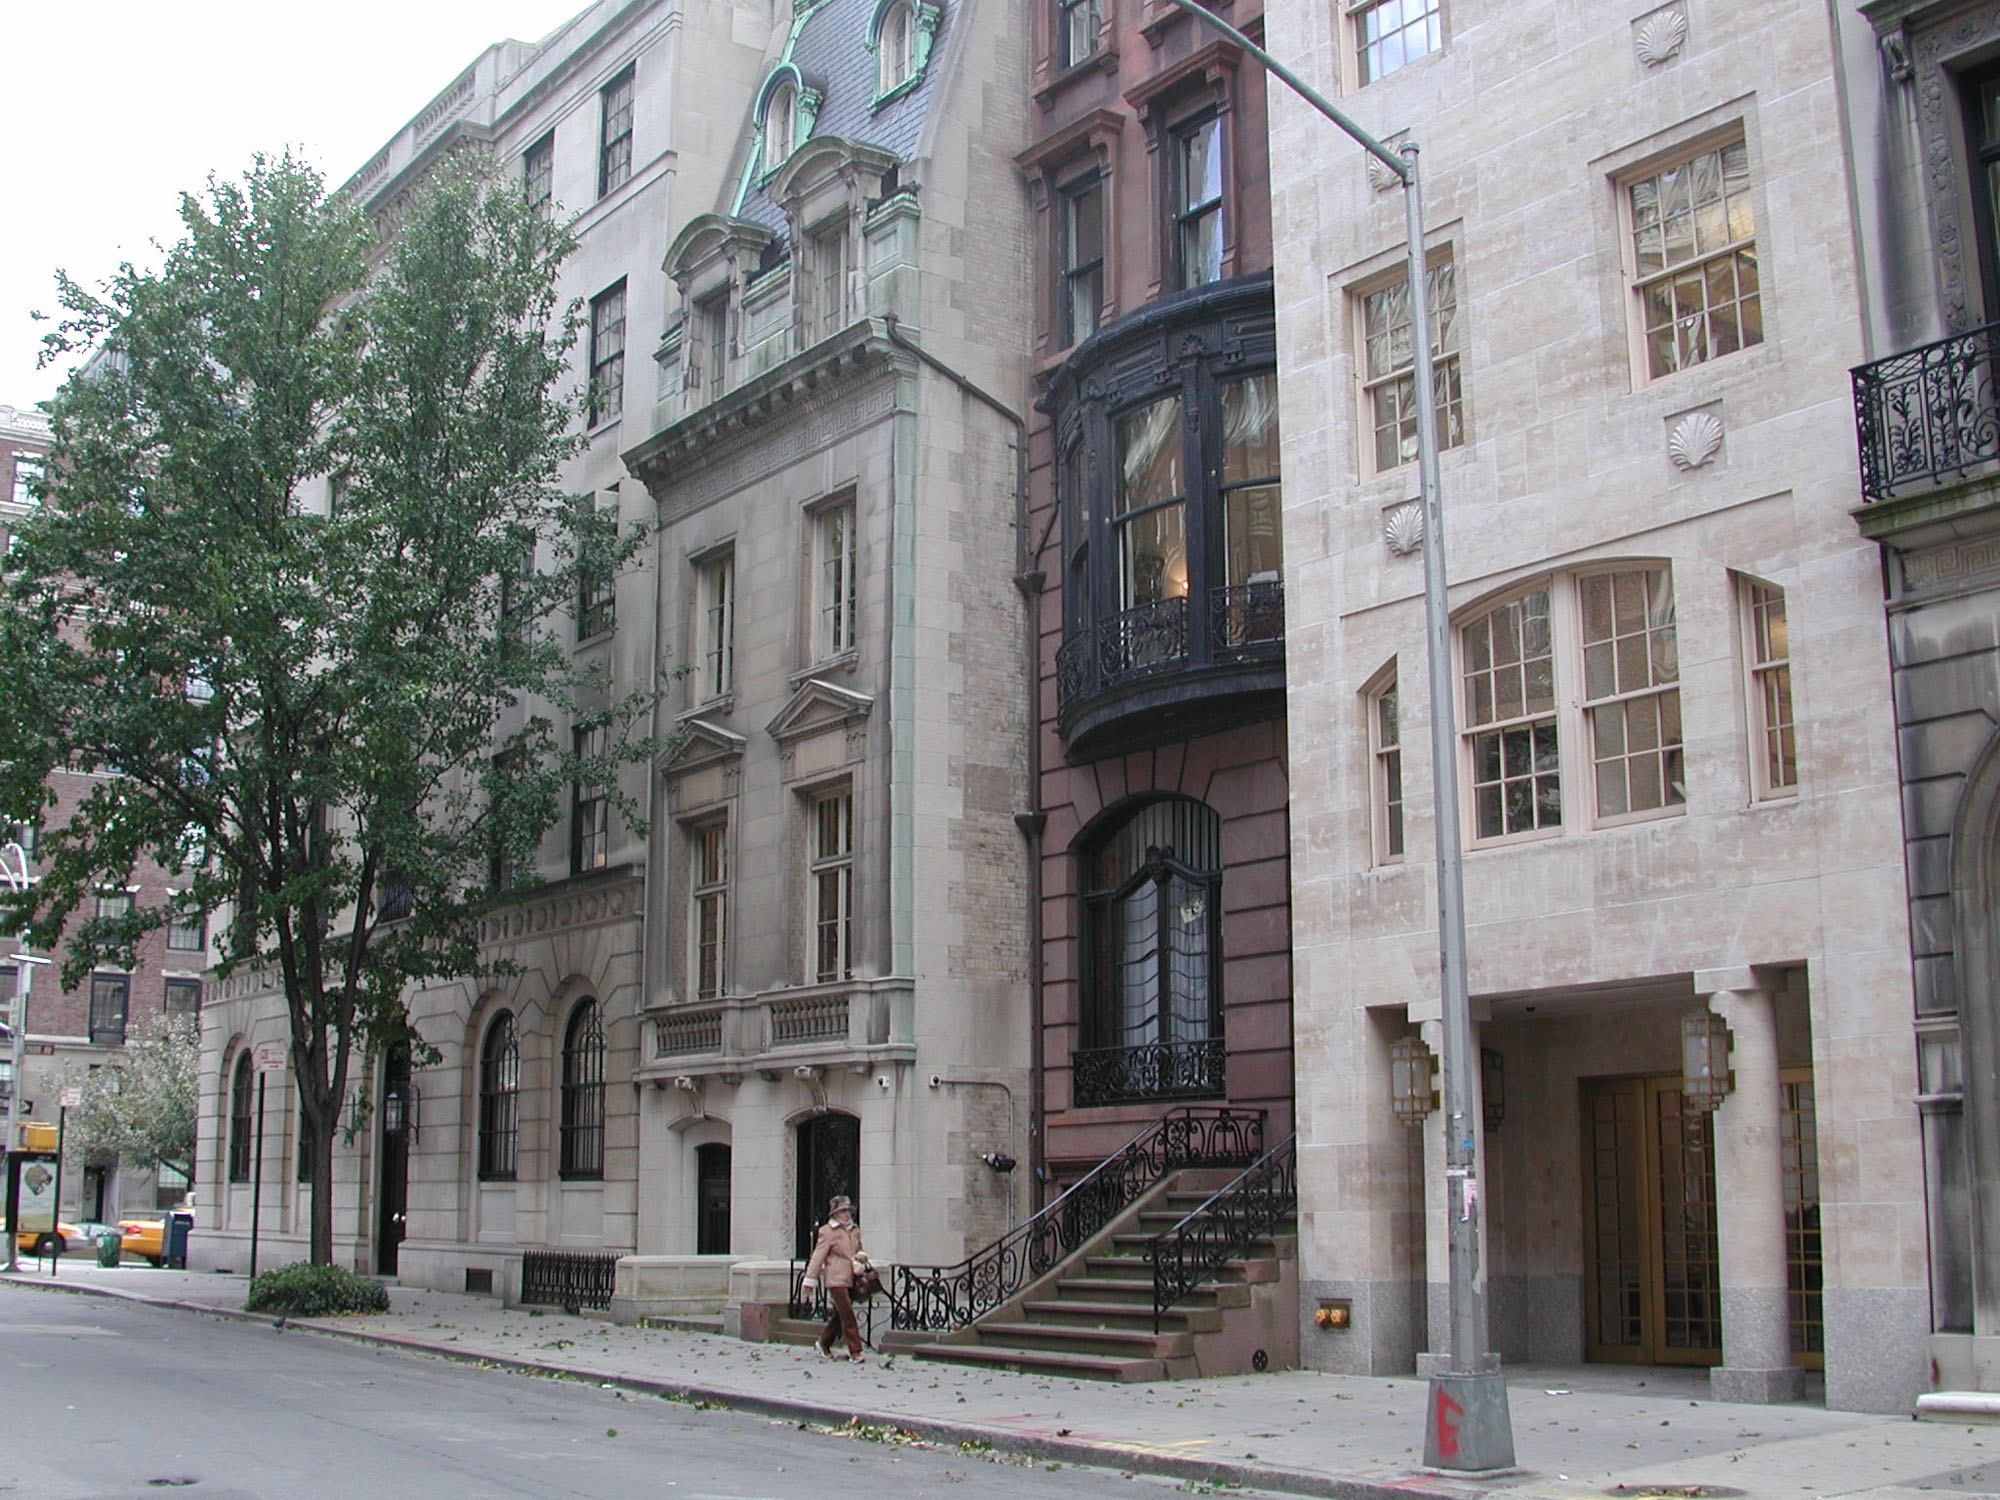 52 and 54 East 68th Street buildings are acquired as additions to the CFR New York headquarters